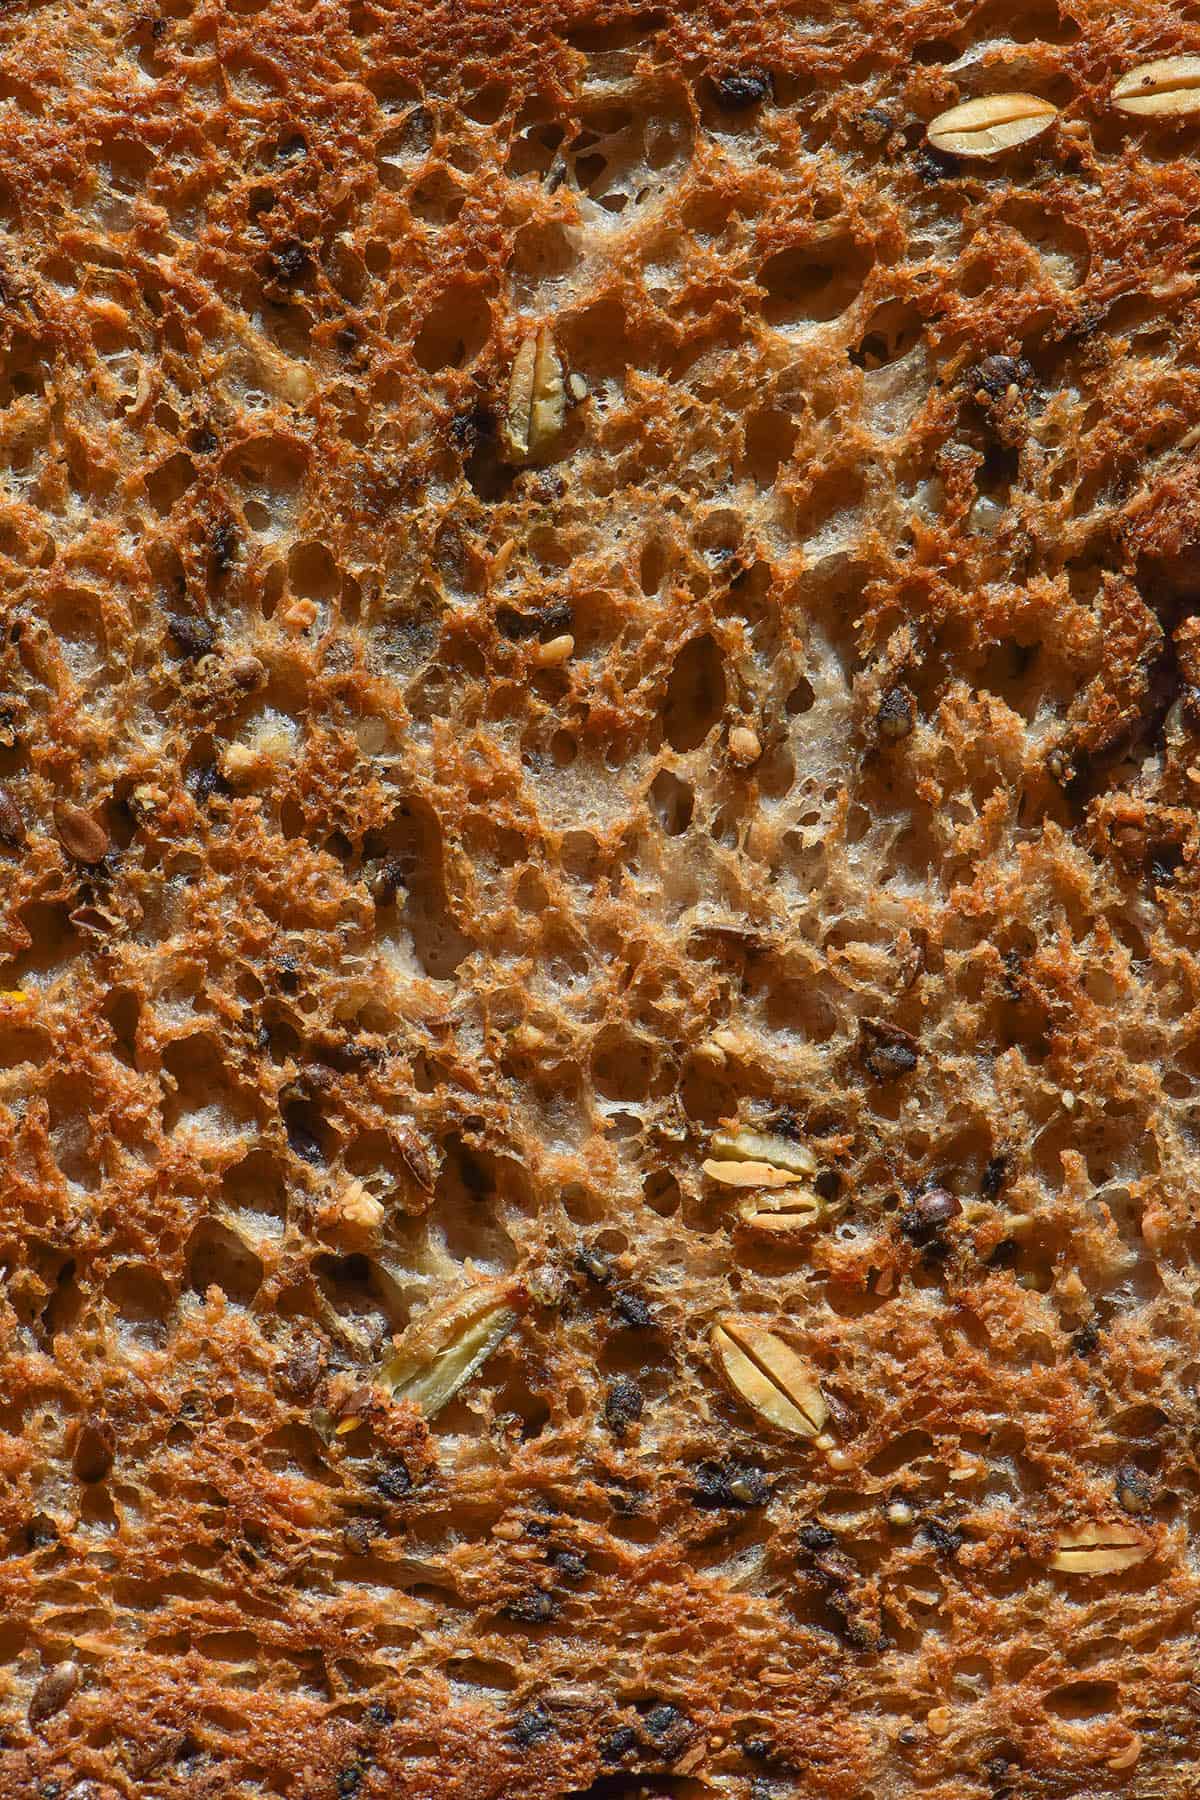 A macro image of the crumb of a slice of toasted gluten free seeded bread